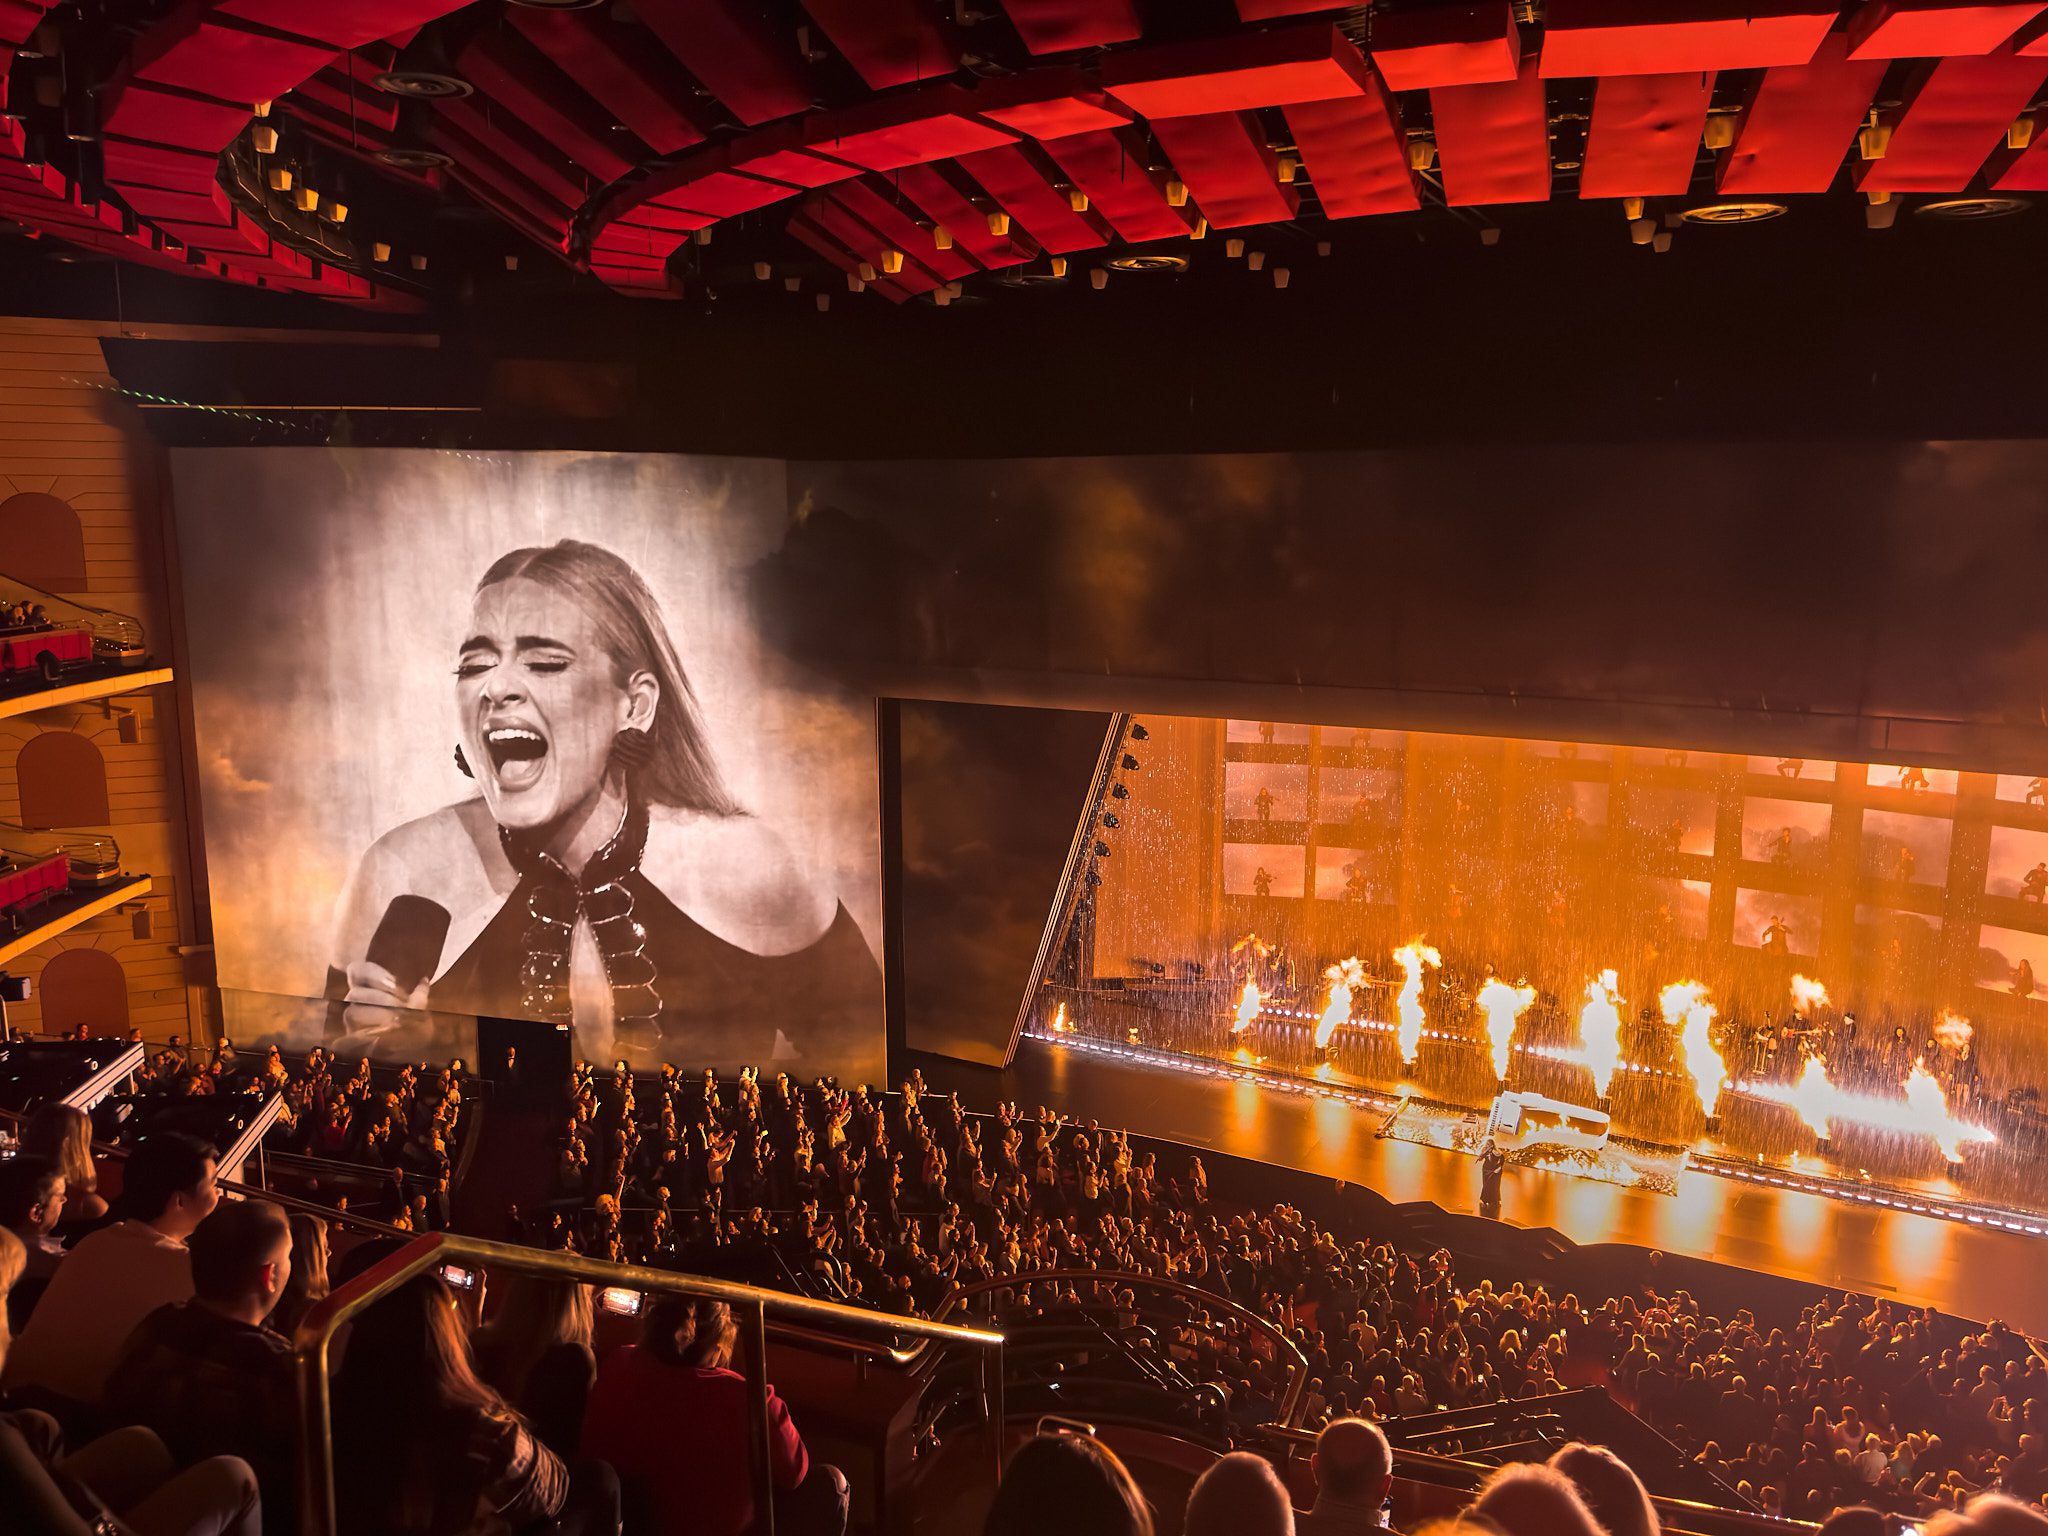 Adele performing during Weekends With Adele at the Las Vegas Colosseum January 20, 2023.